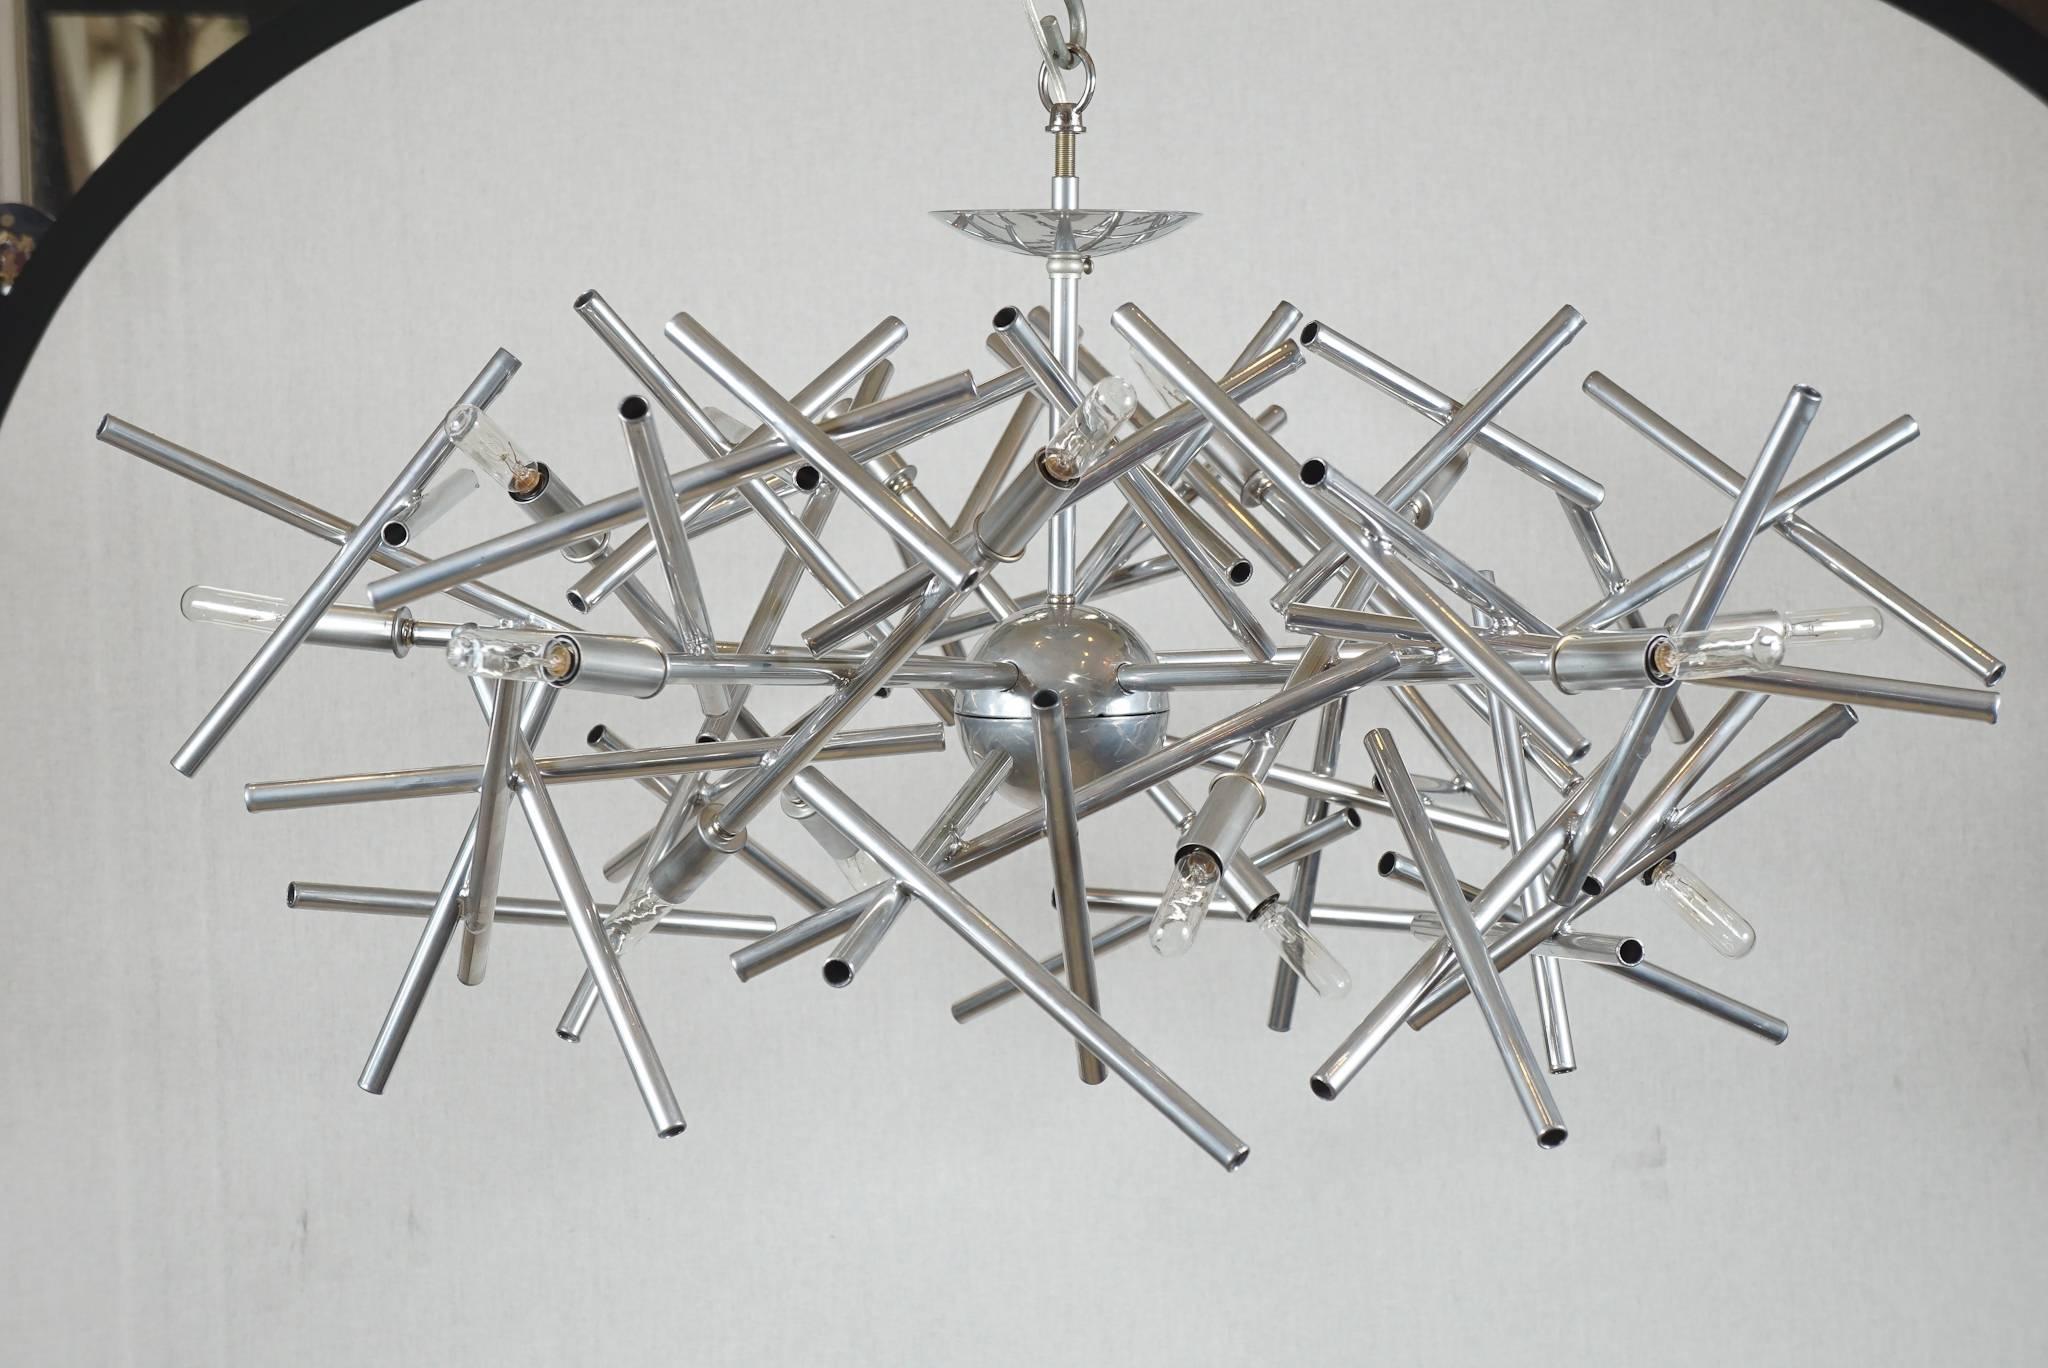 This is an angular momentum chandelier with a nickel finish by Lou Blass. All orders are custom-made to any size and shape with thousands of finishes to choose from. It usually takes 6 to 8 weeks for completion.